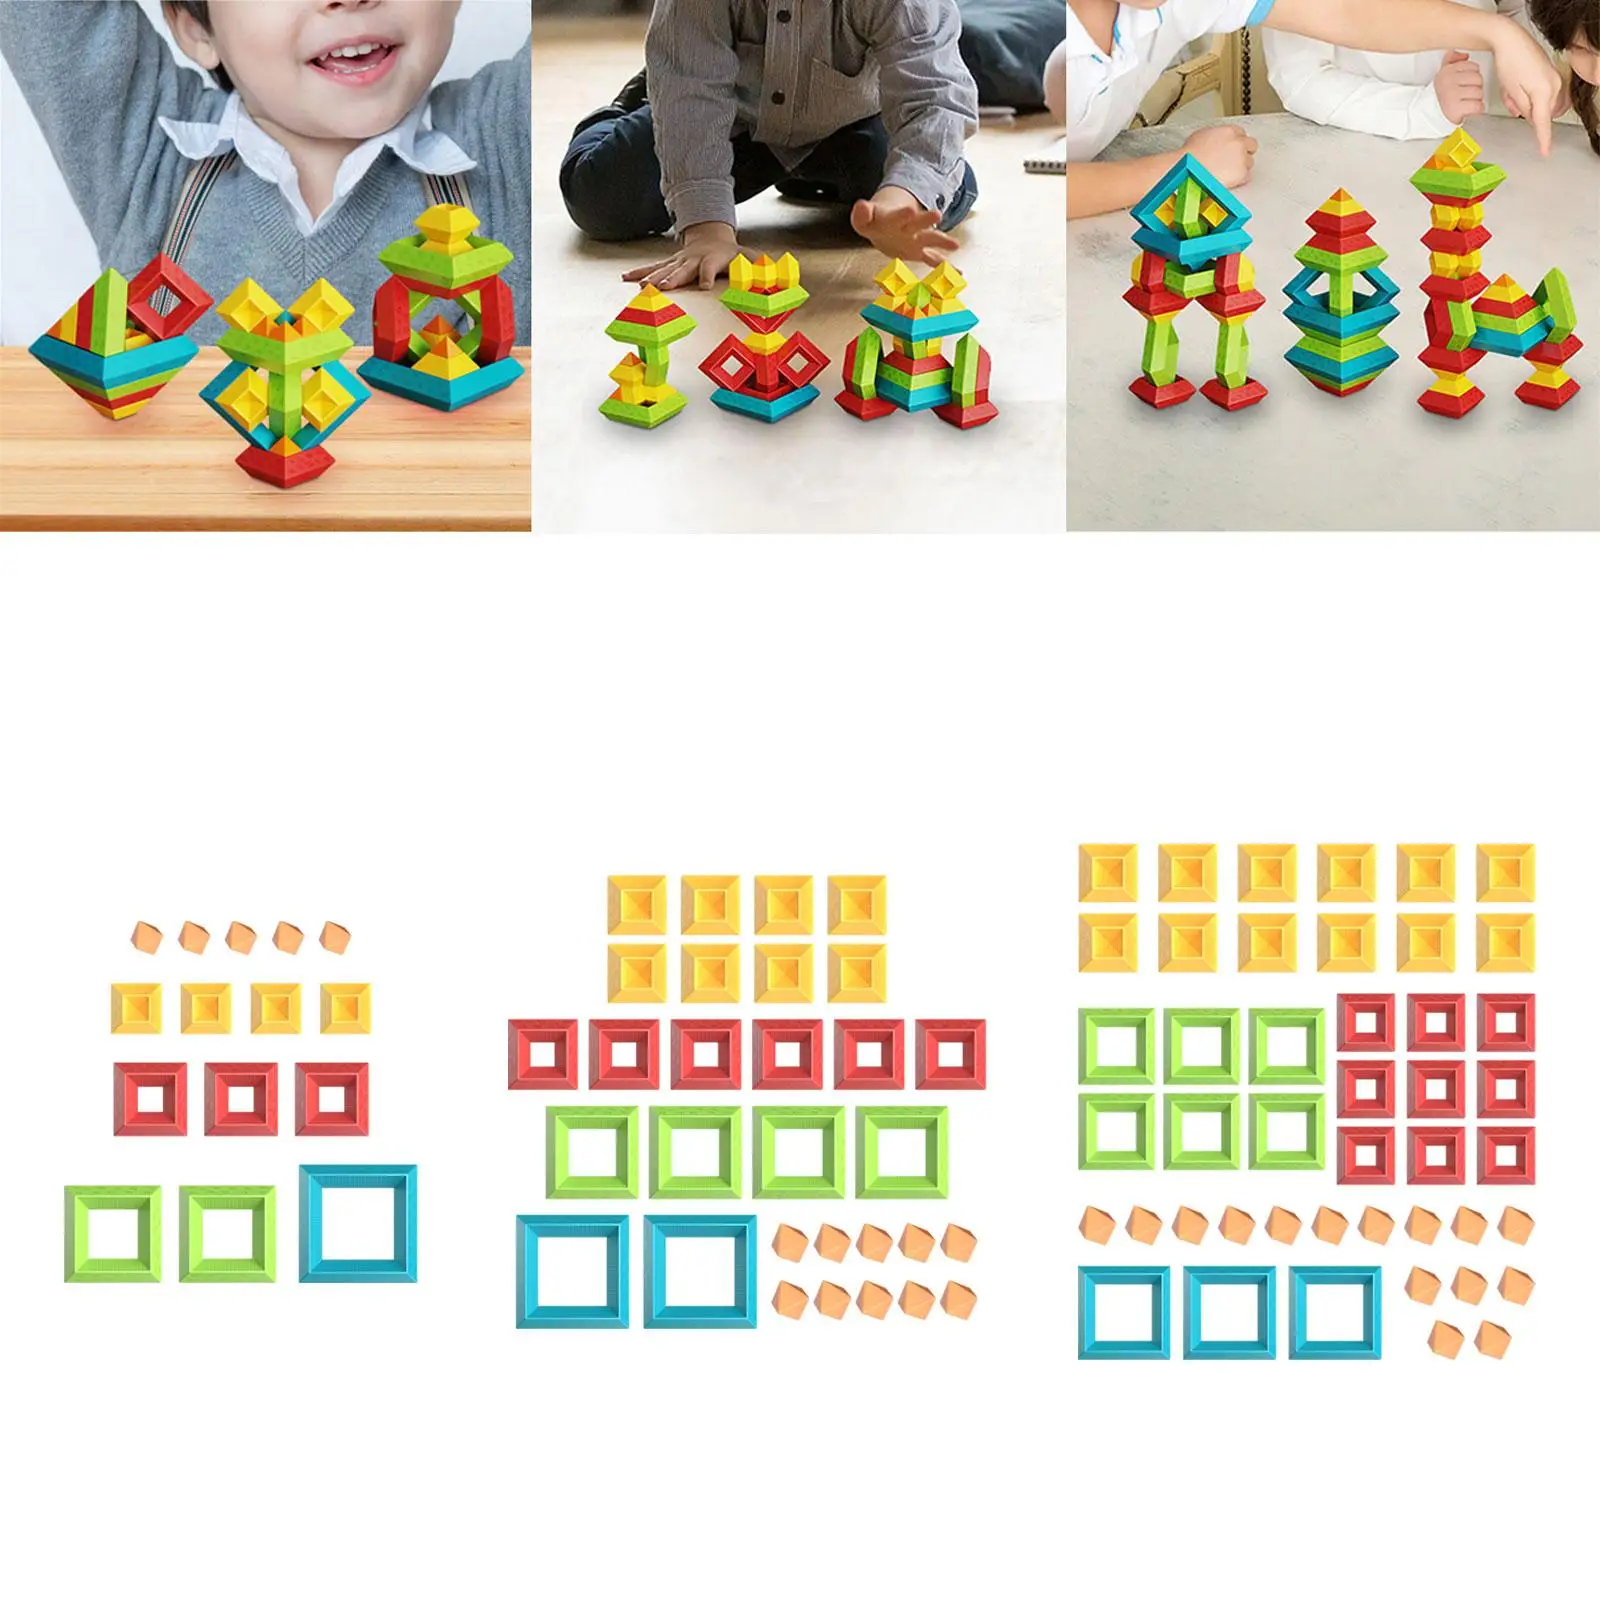 Baby Stacking Toys Learning Activities Stem Pyramids Building Blocks for 1 2 3 4 5 Year Old Boys Girls Kids Toddlers Children